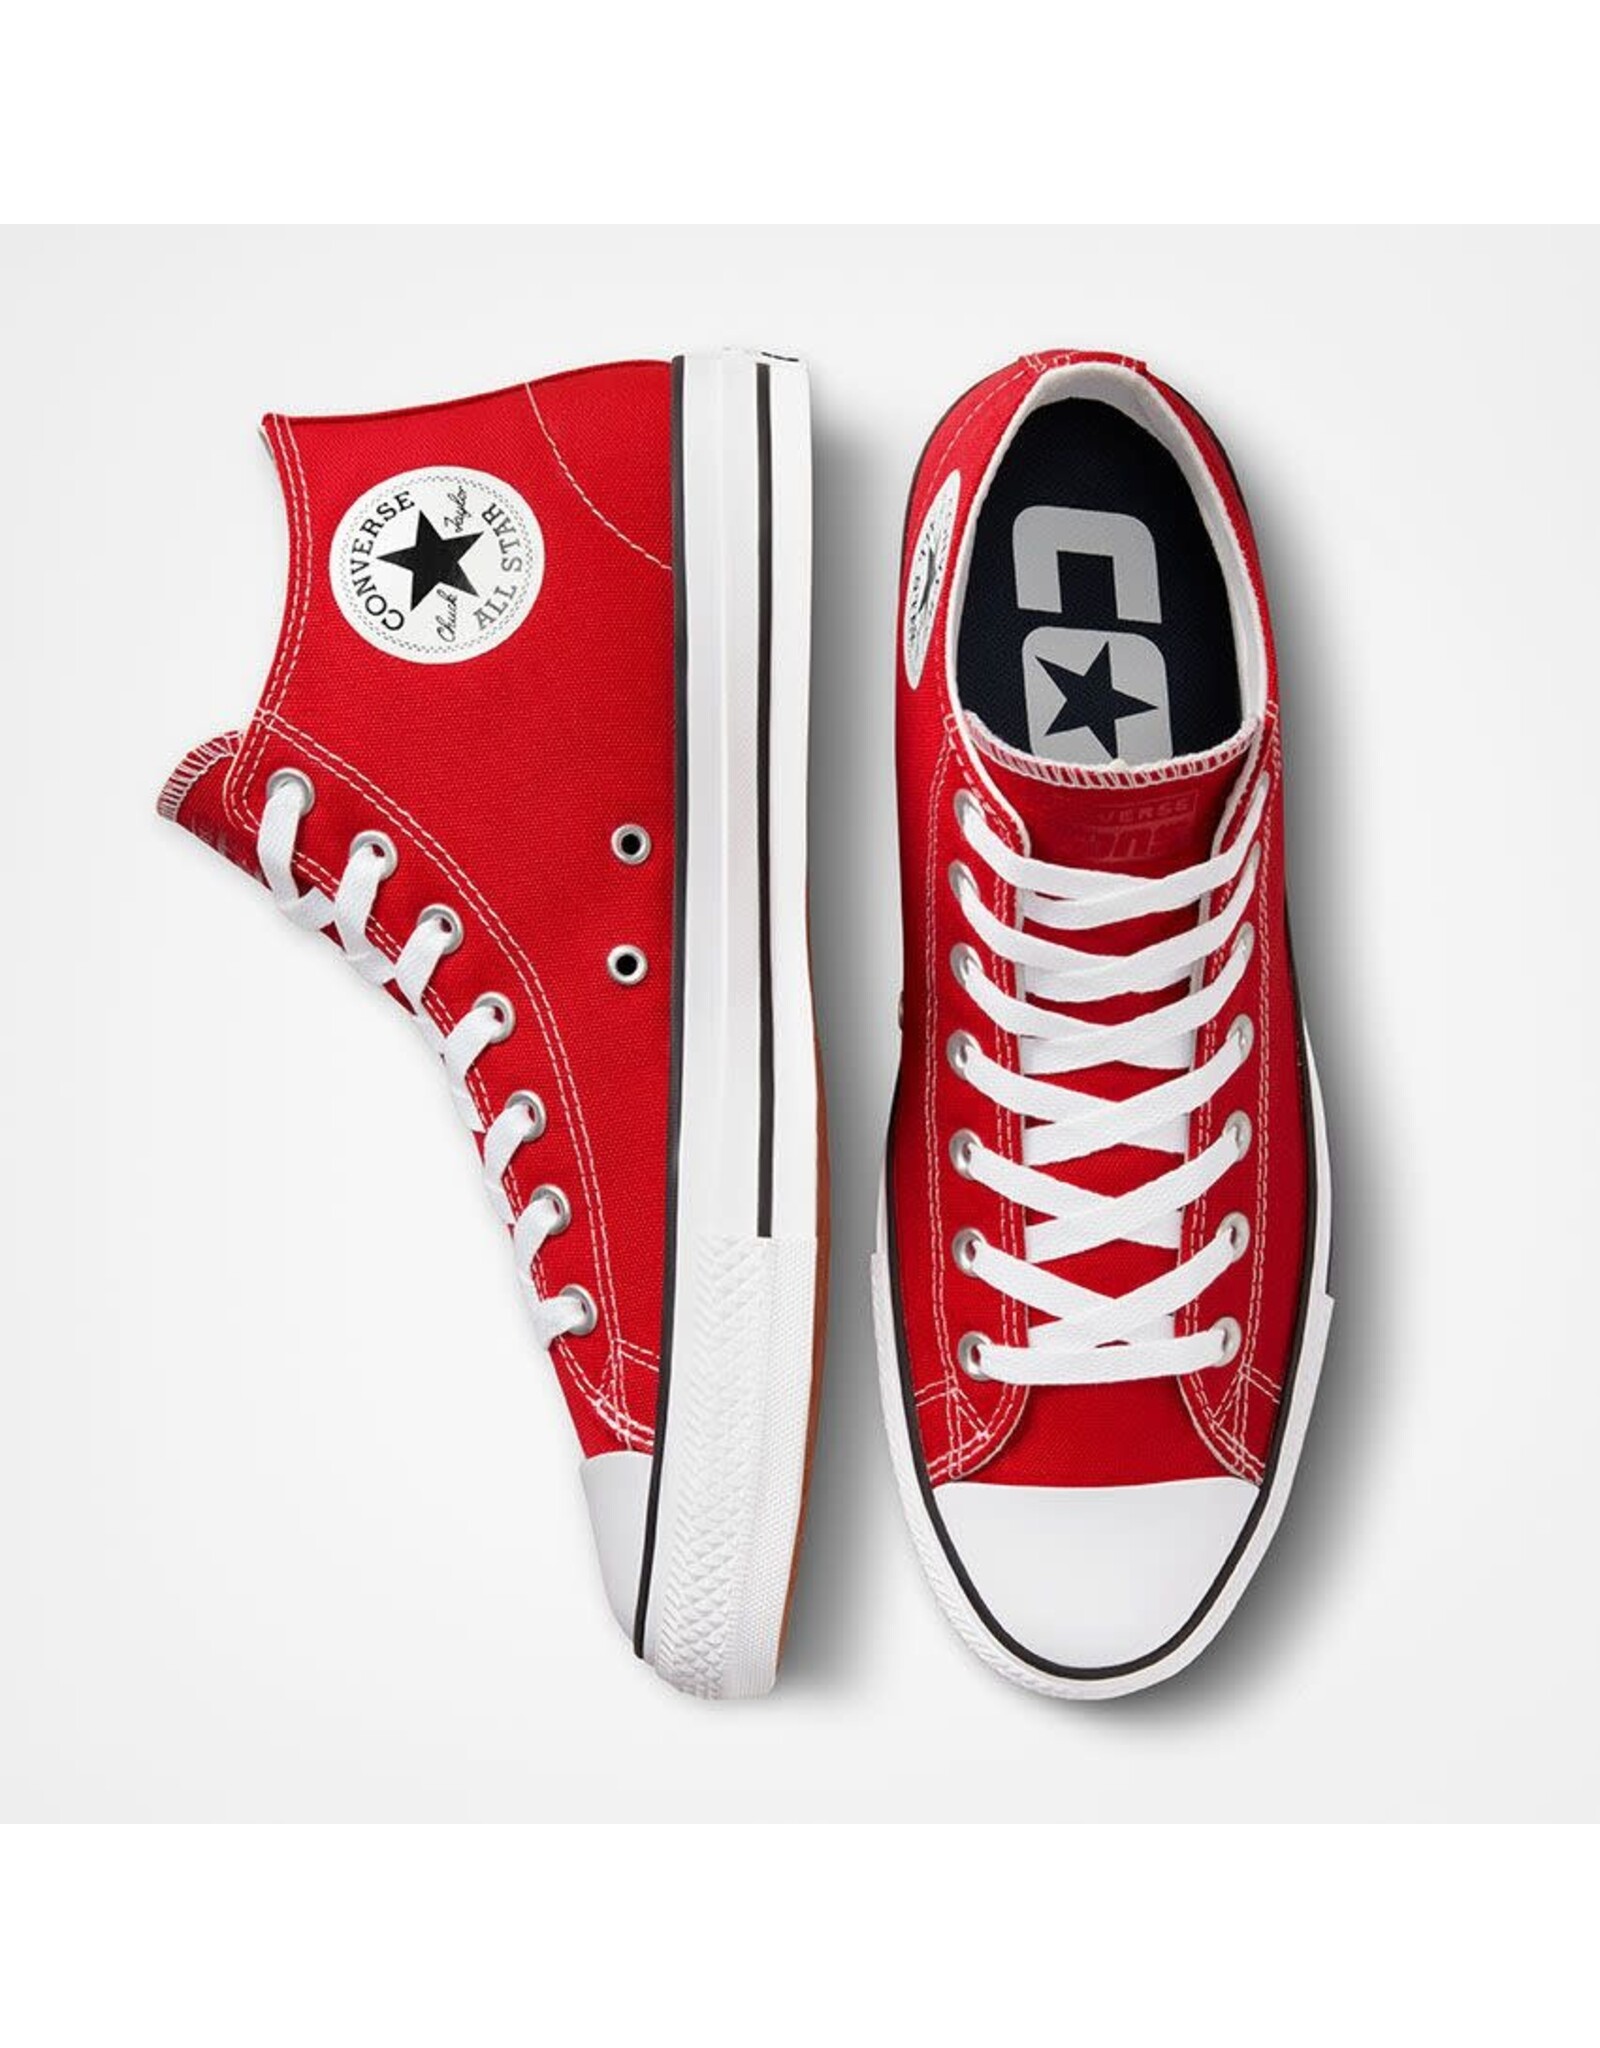 CONS CHUCK TAYLOR ALL STAR PRO UNIVERSITY RED/WHITE/BLACK C398CR - A02934C